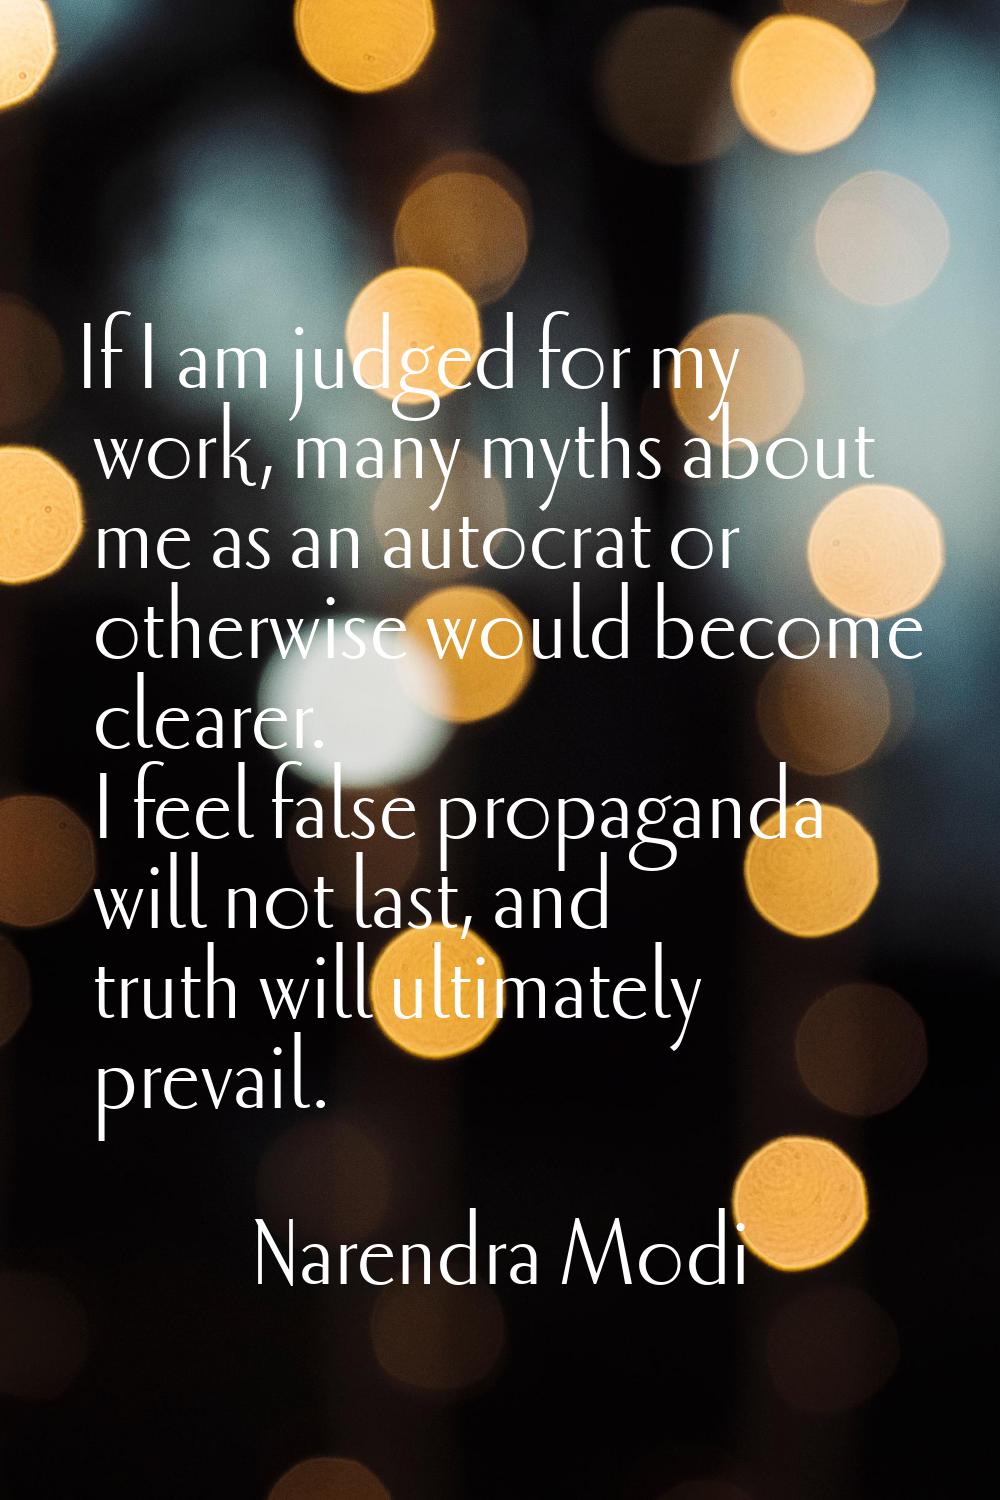 If I am judged for my work, many myths about me as an autocrat or otherwise would become clearer. I